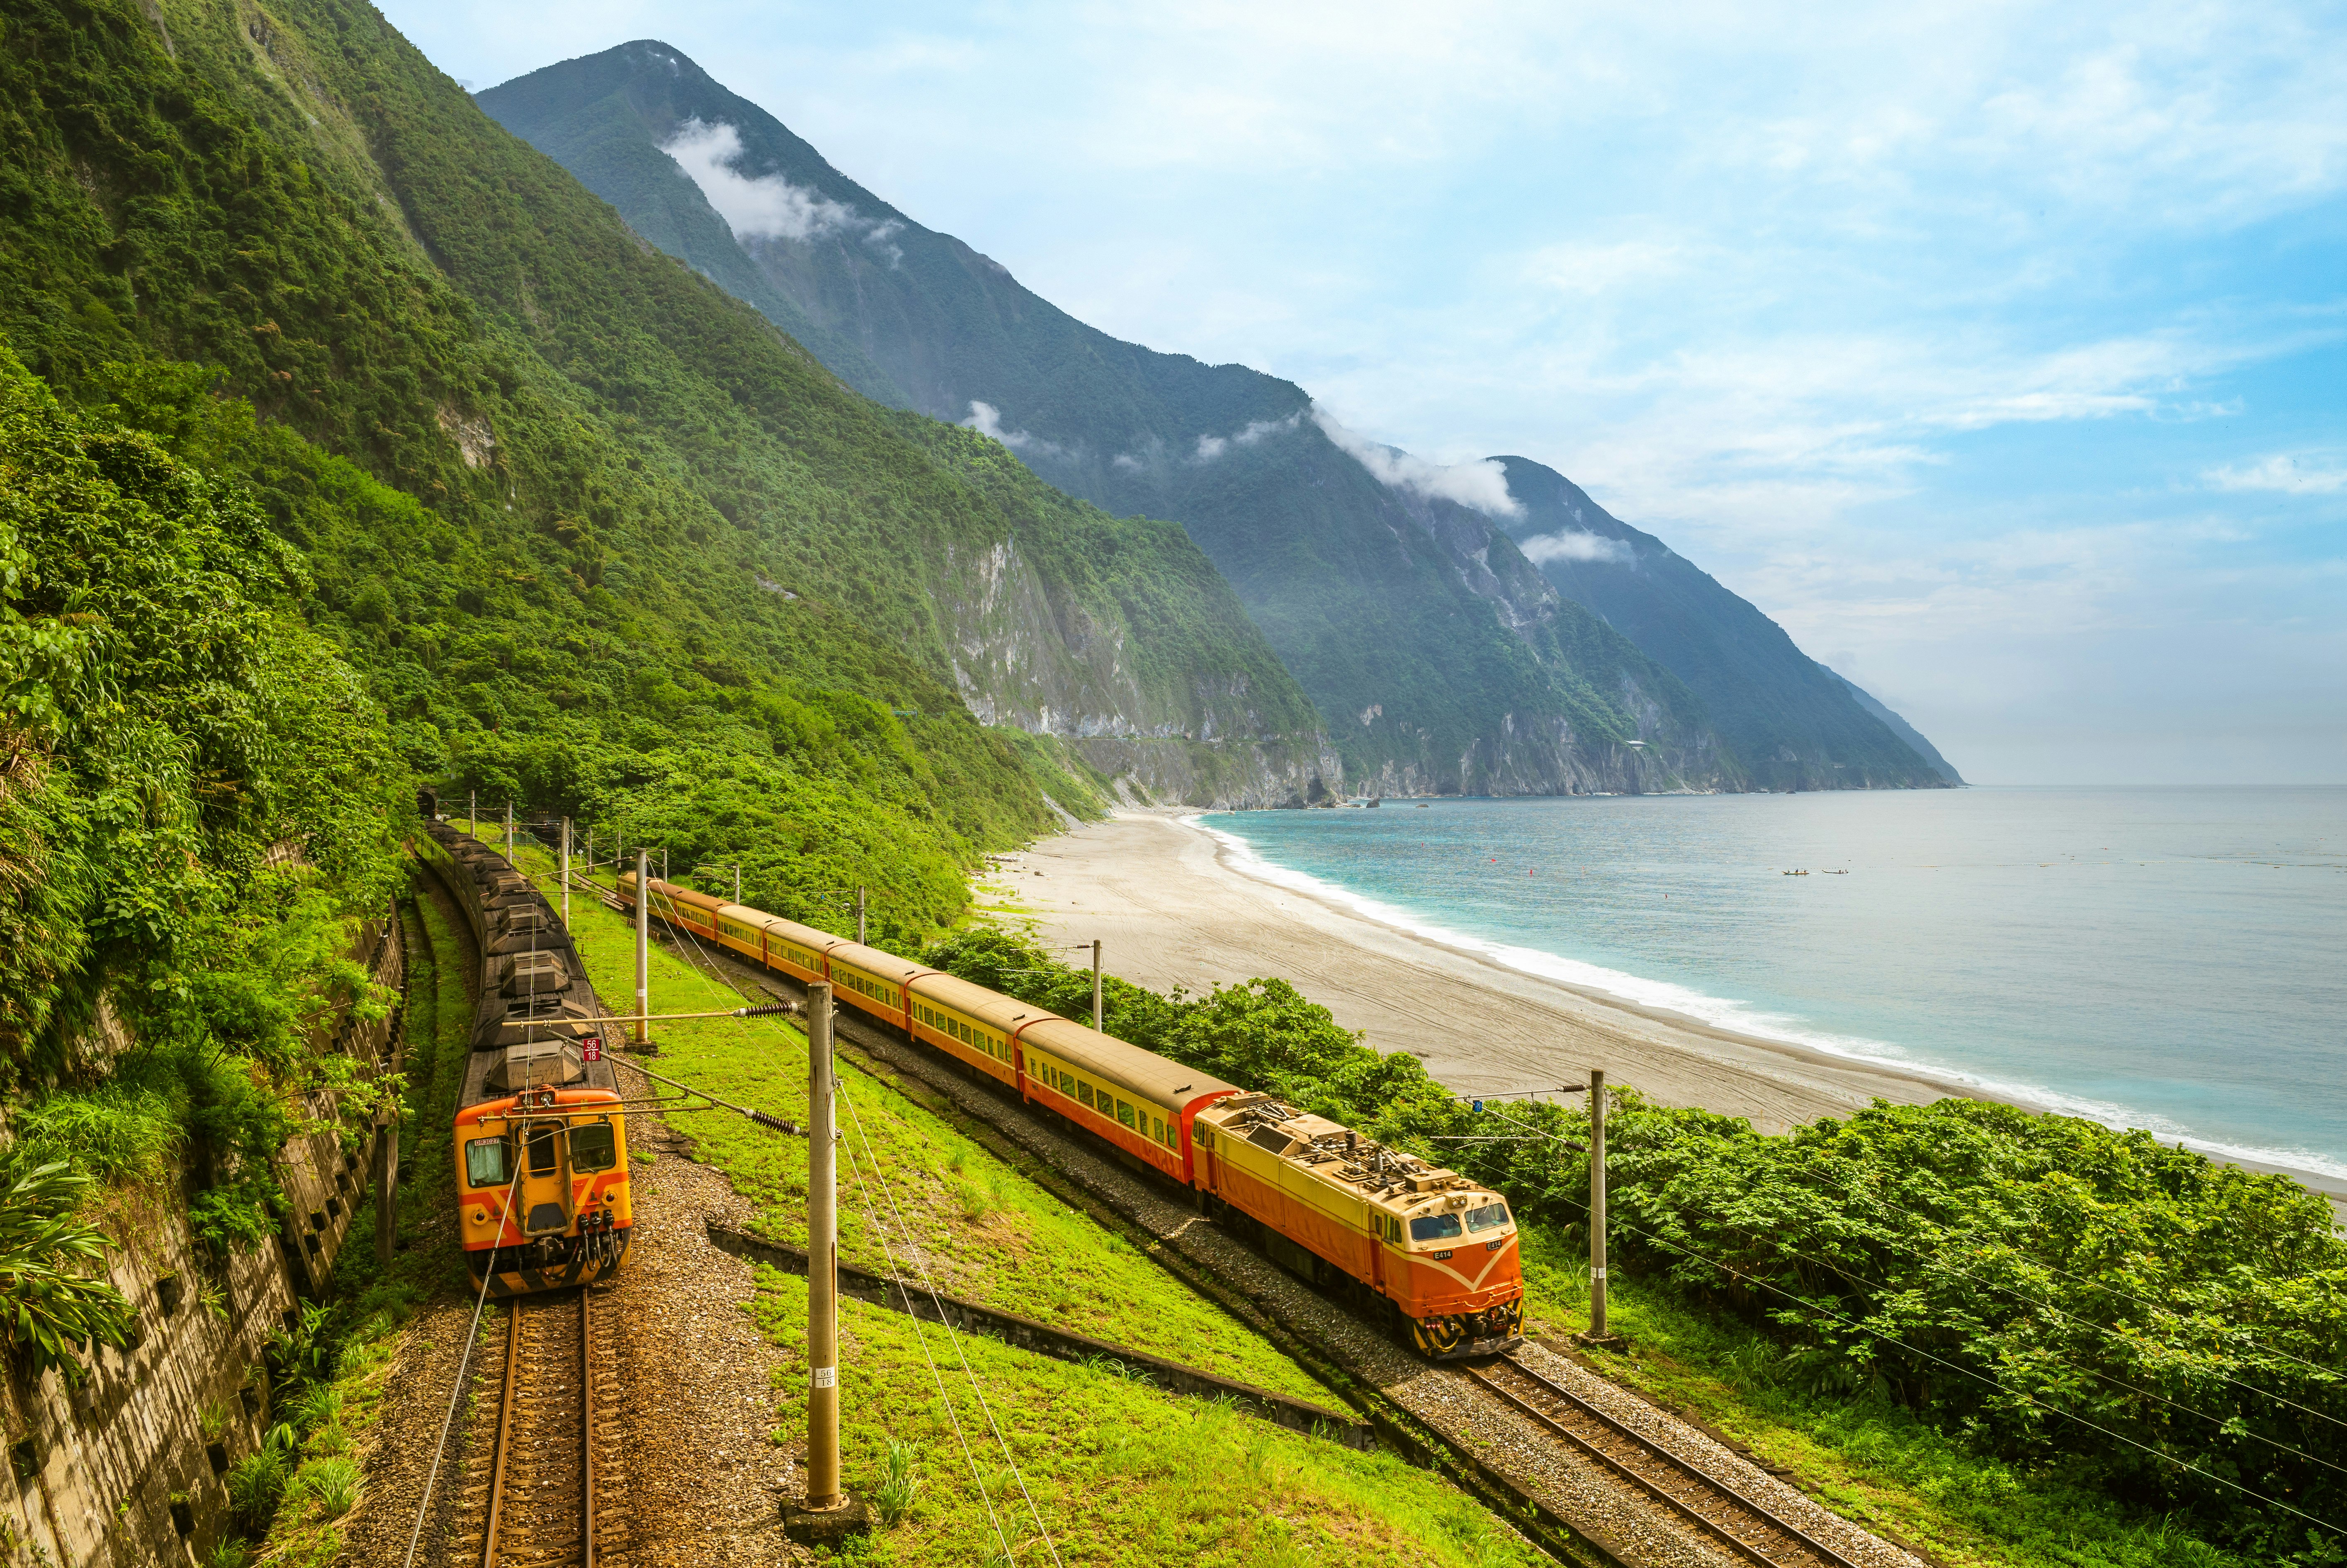 Two trains on a lush green coastline with a tall peak in the distance